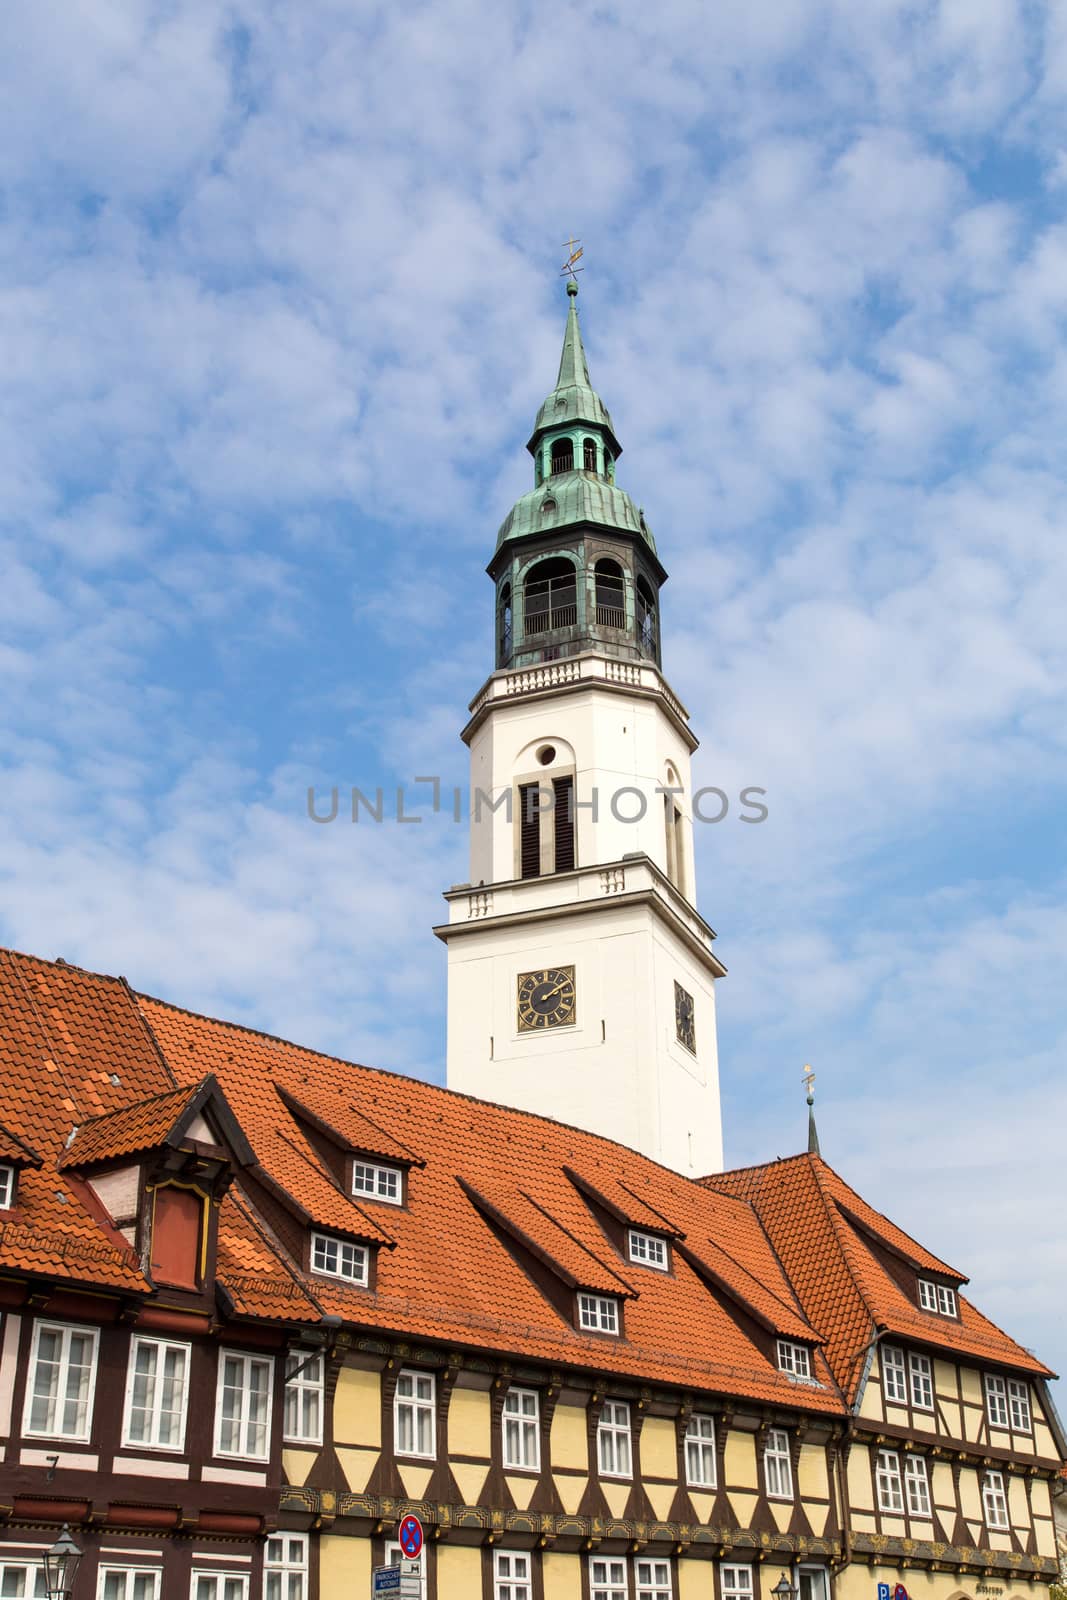 Church Tower in Celle, Germany by oliverfoerstner